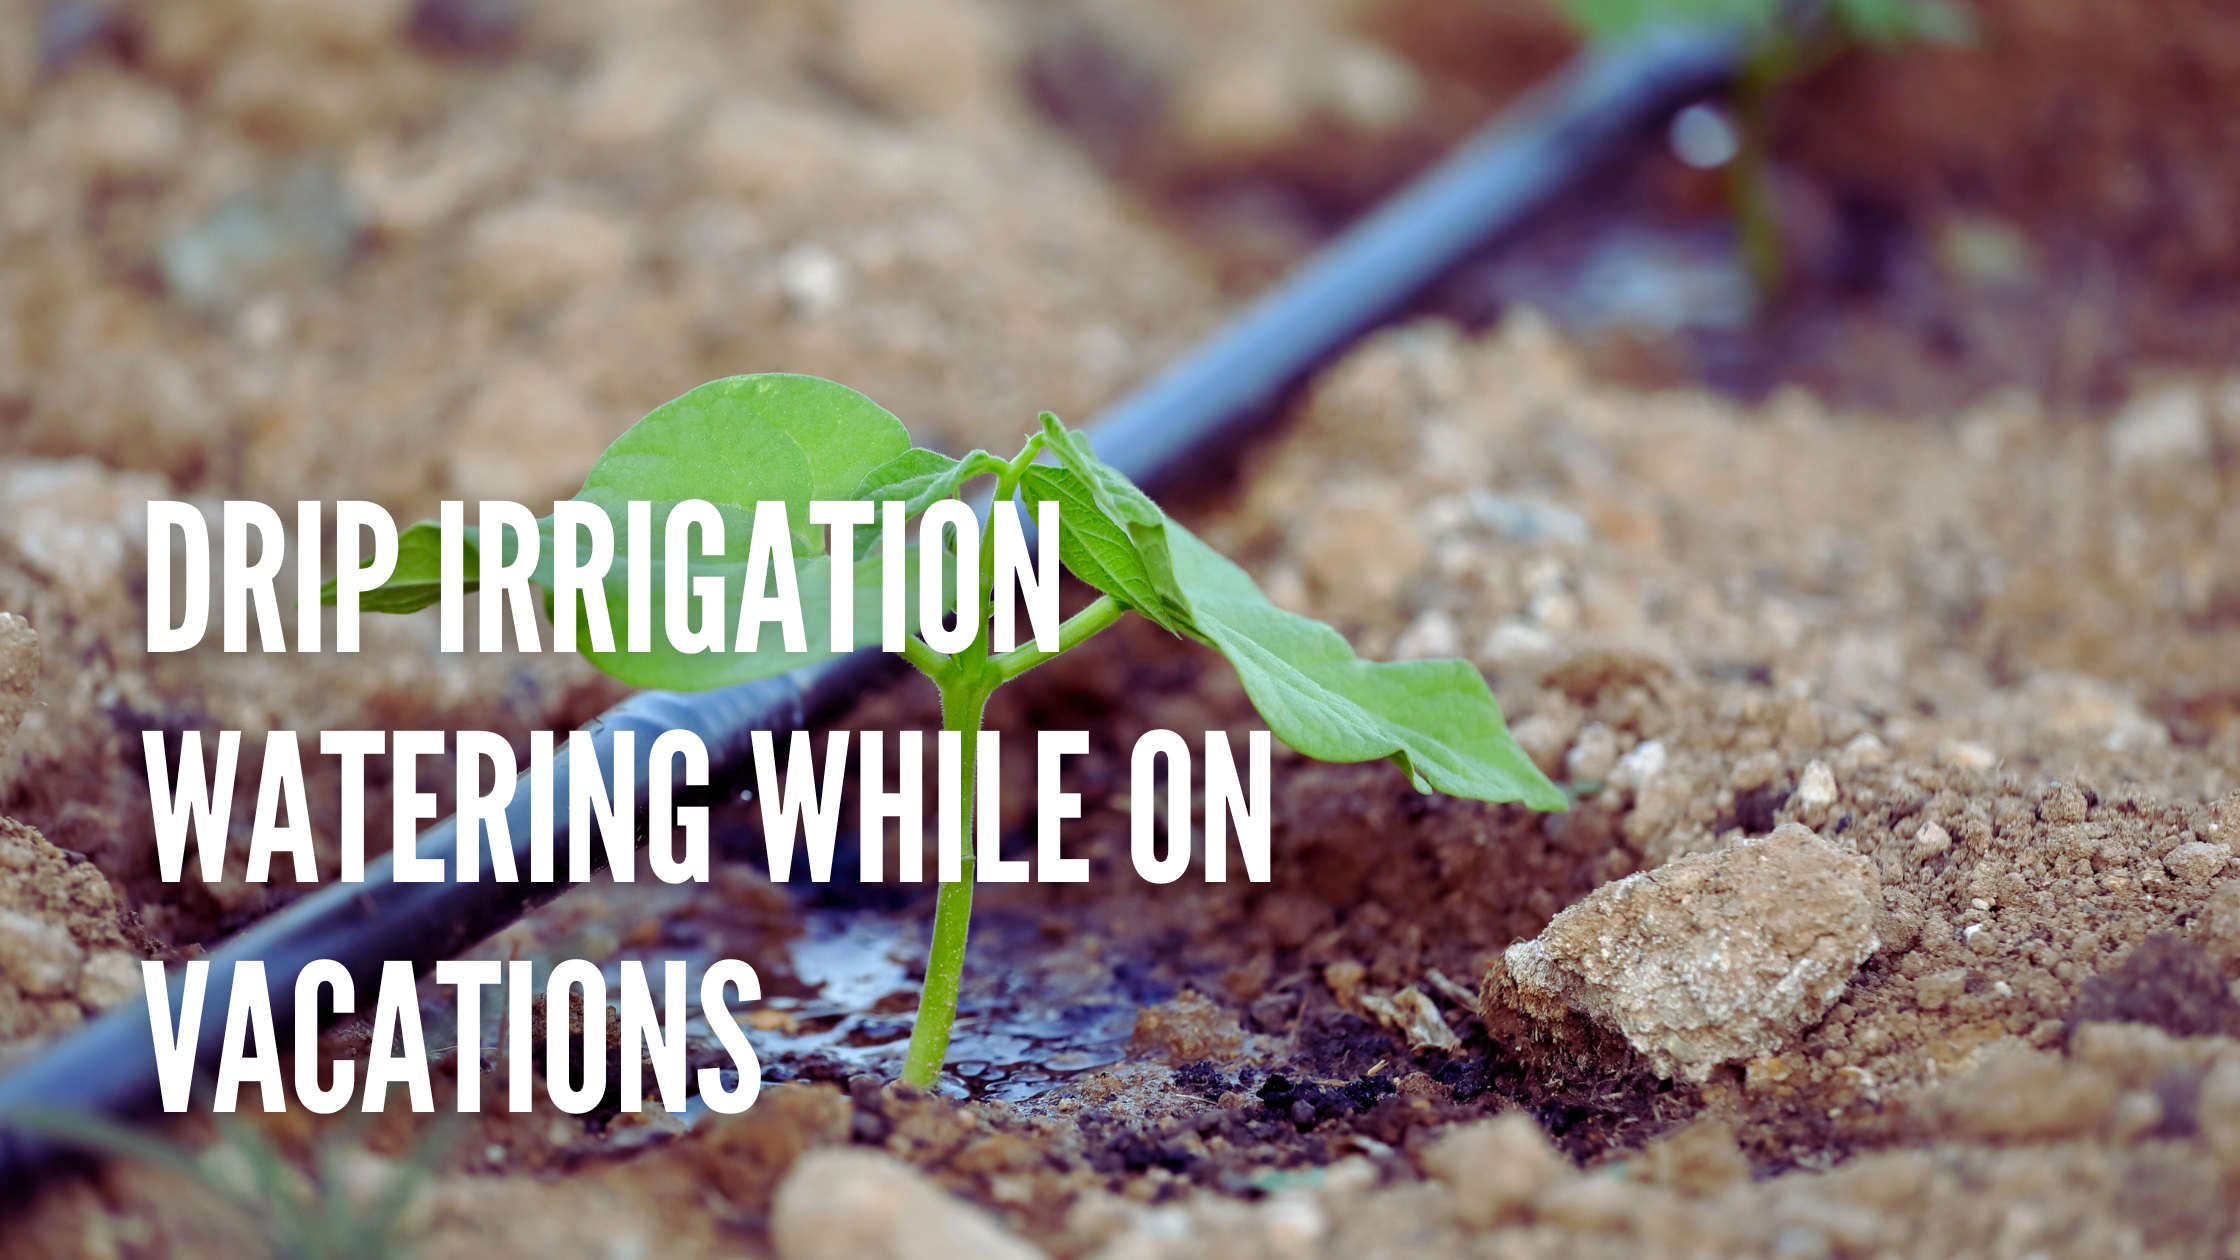 How to keep garden watered while on vacation